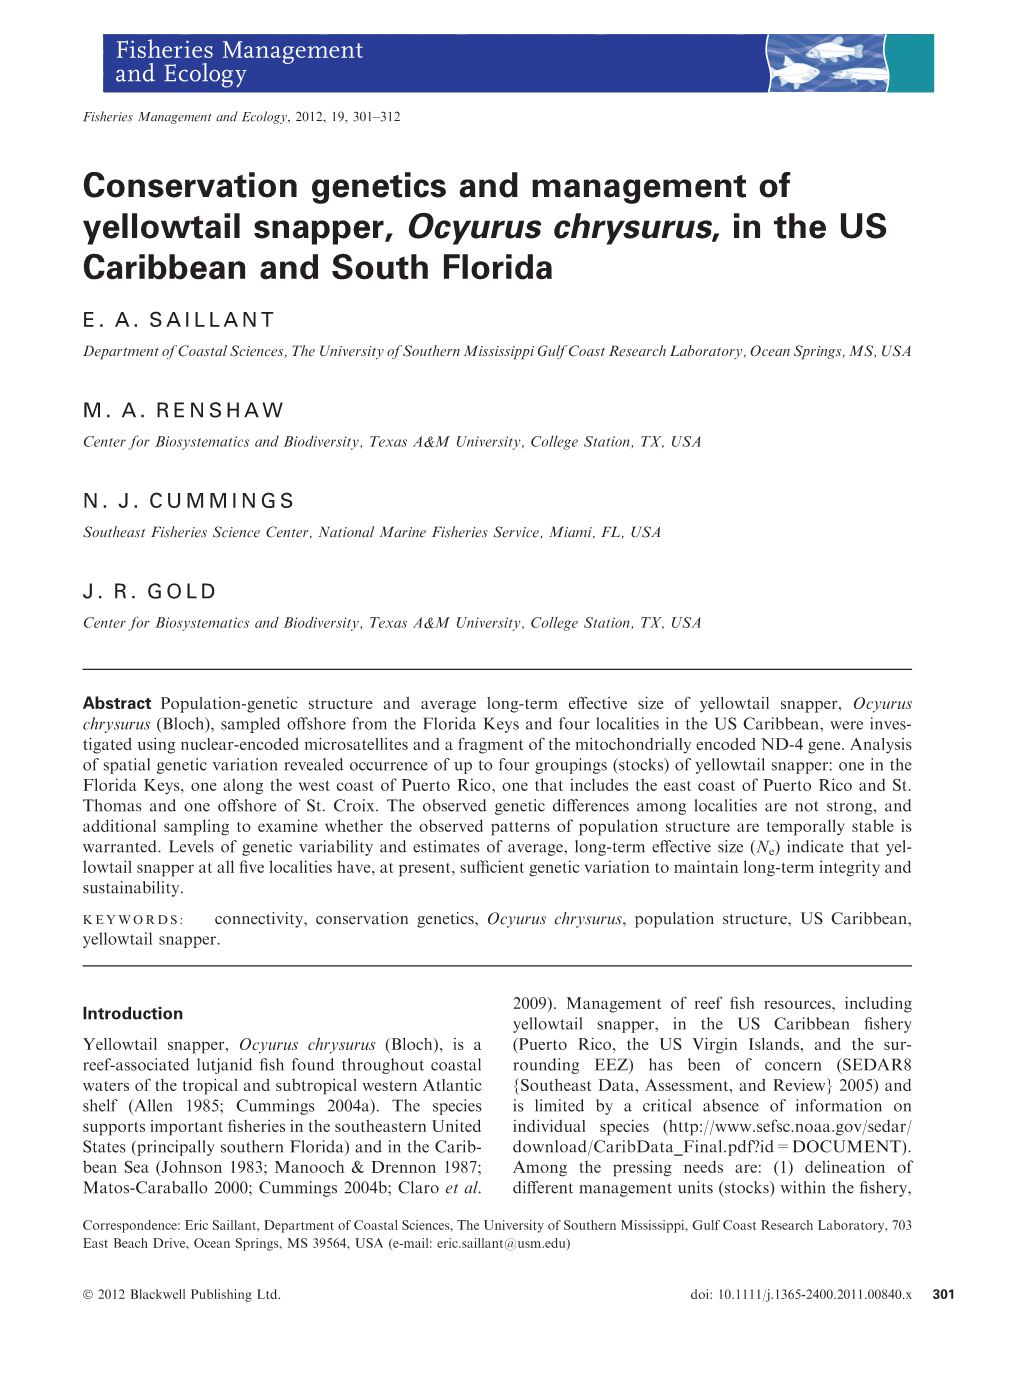 Conservation Genetics and Management of Yellowtail Snapper, Ocyurus Chrysurus, in the US Caribbean and South Florida